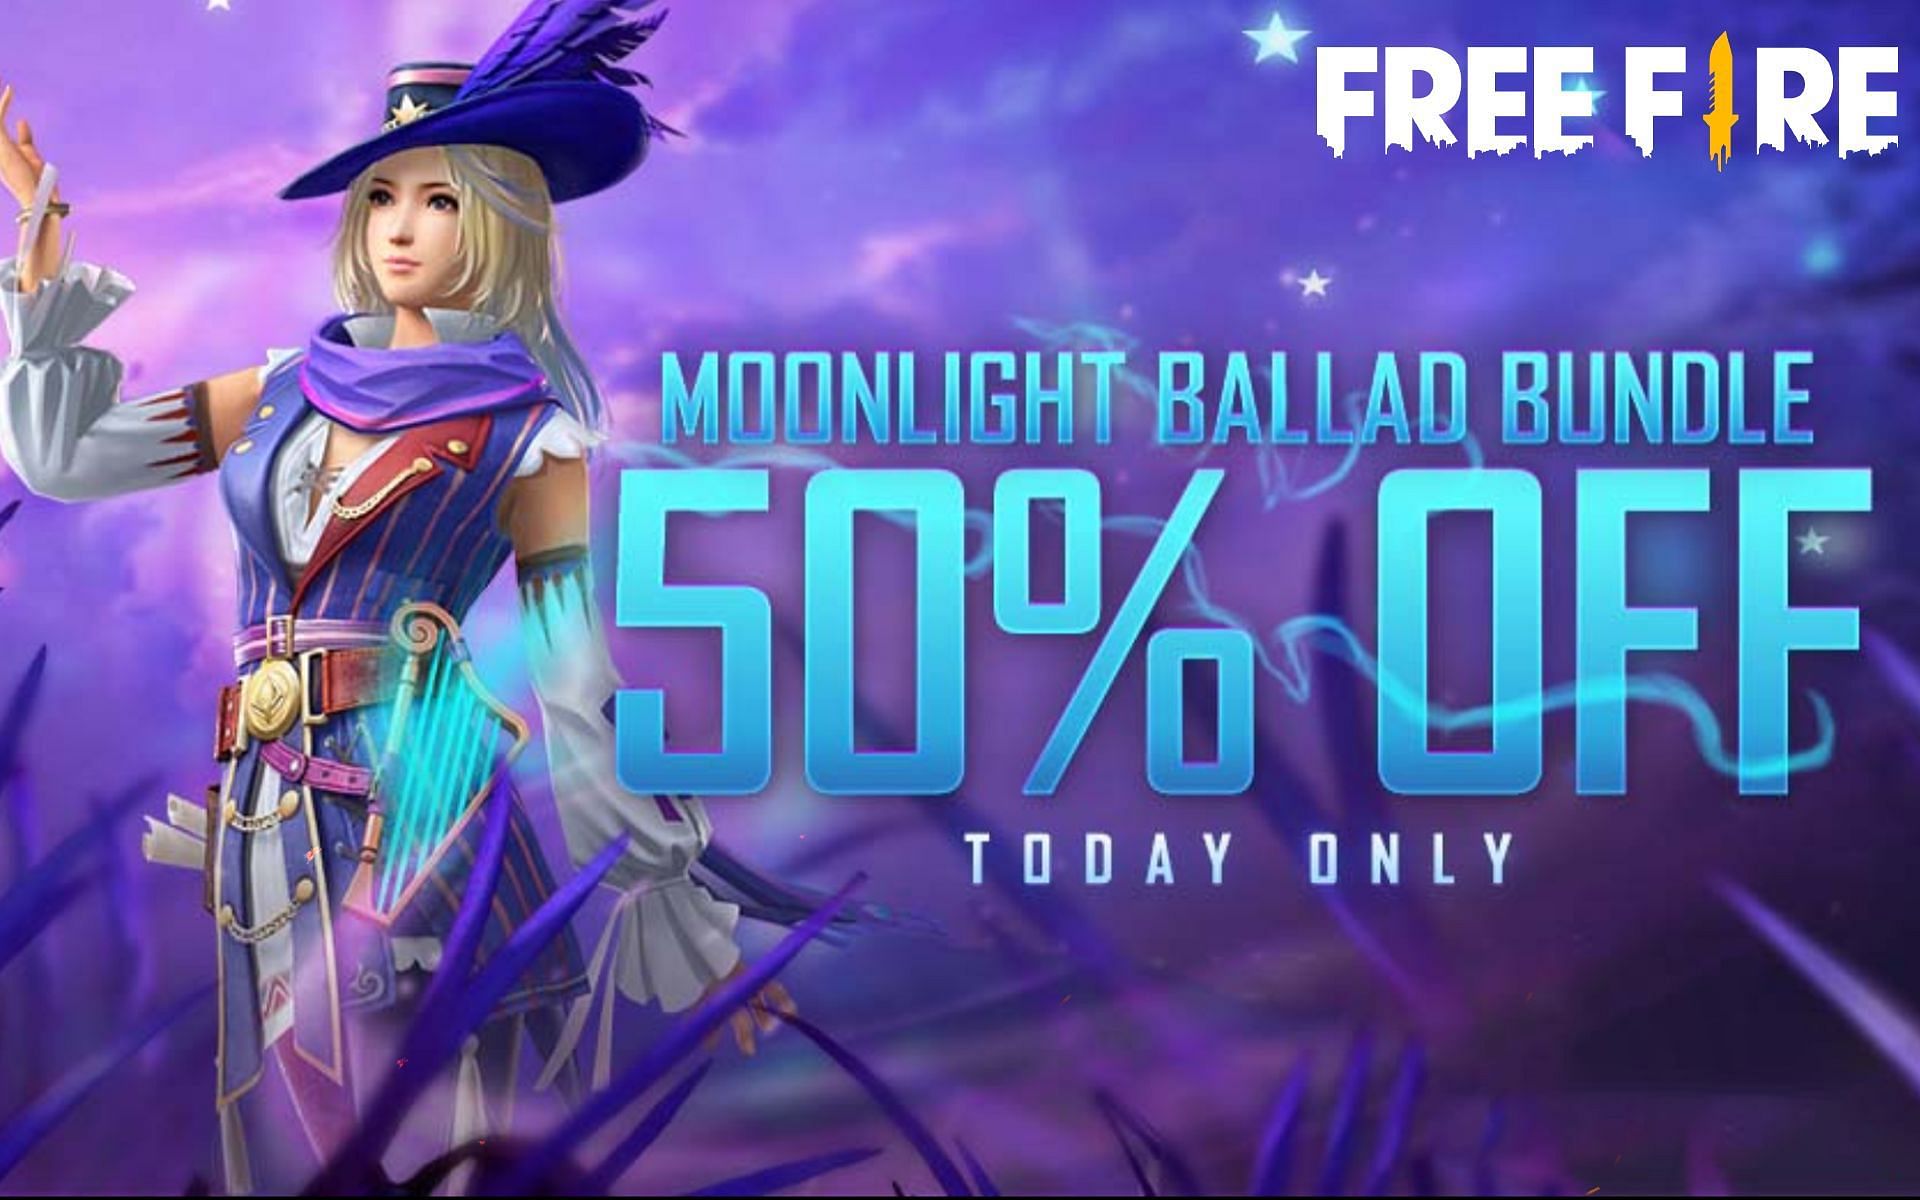 There is a 50% discount in Diamond Royale in Free Fire today (Image via Garena)